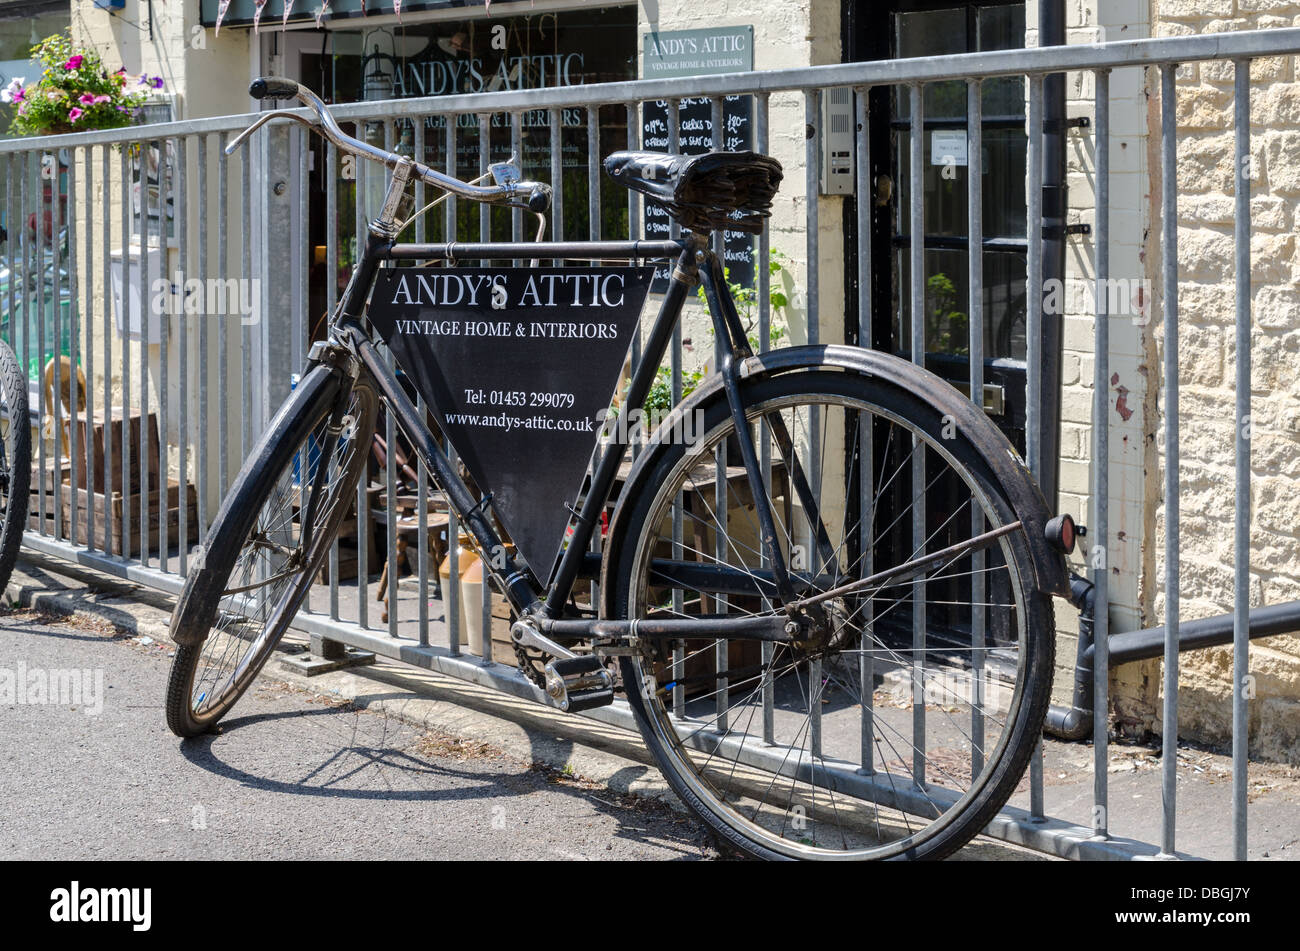 Old fashioned bicycle advertising Andy's Attic interiors shop in the Cotswold town of Nailsworth Stock Photo